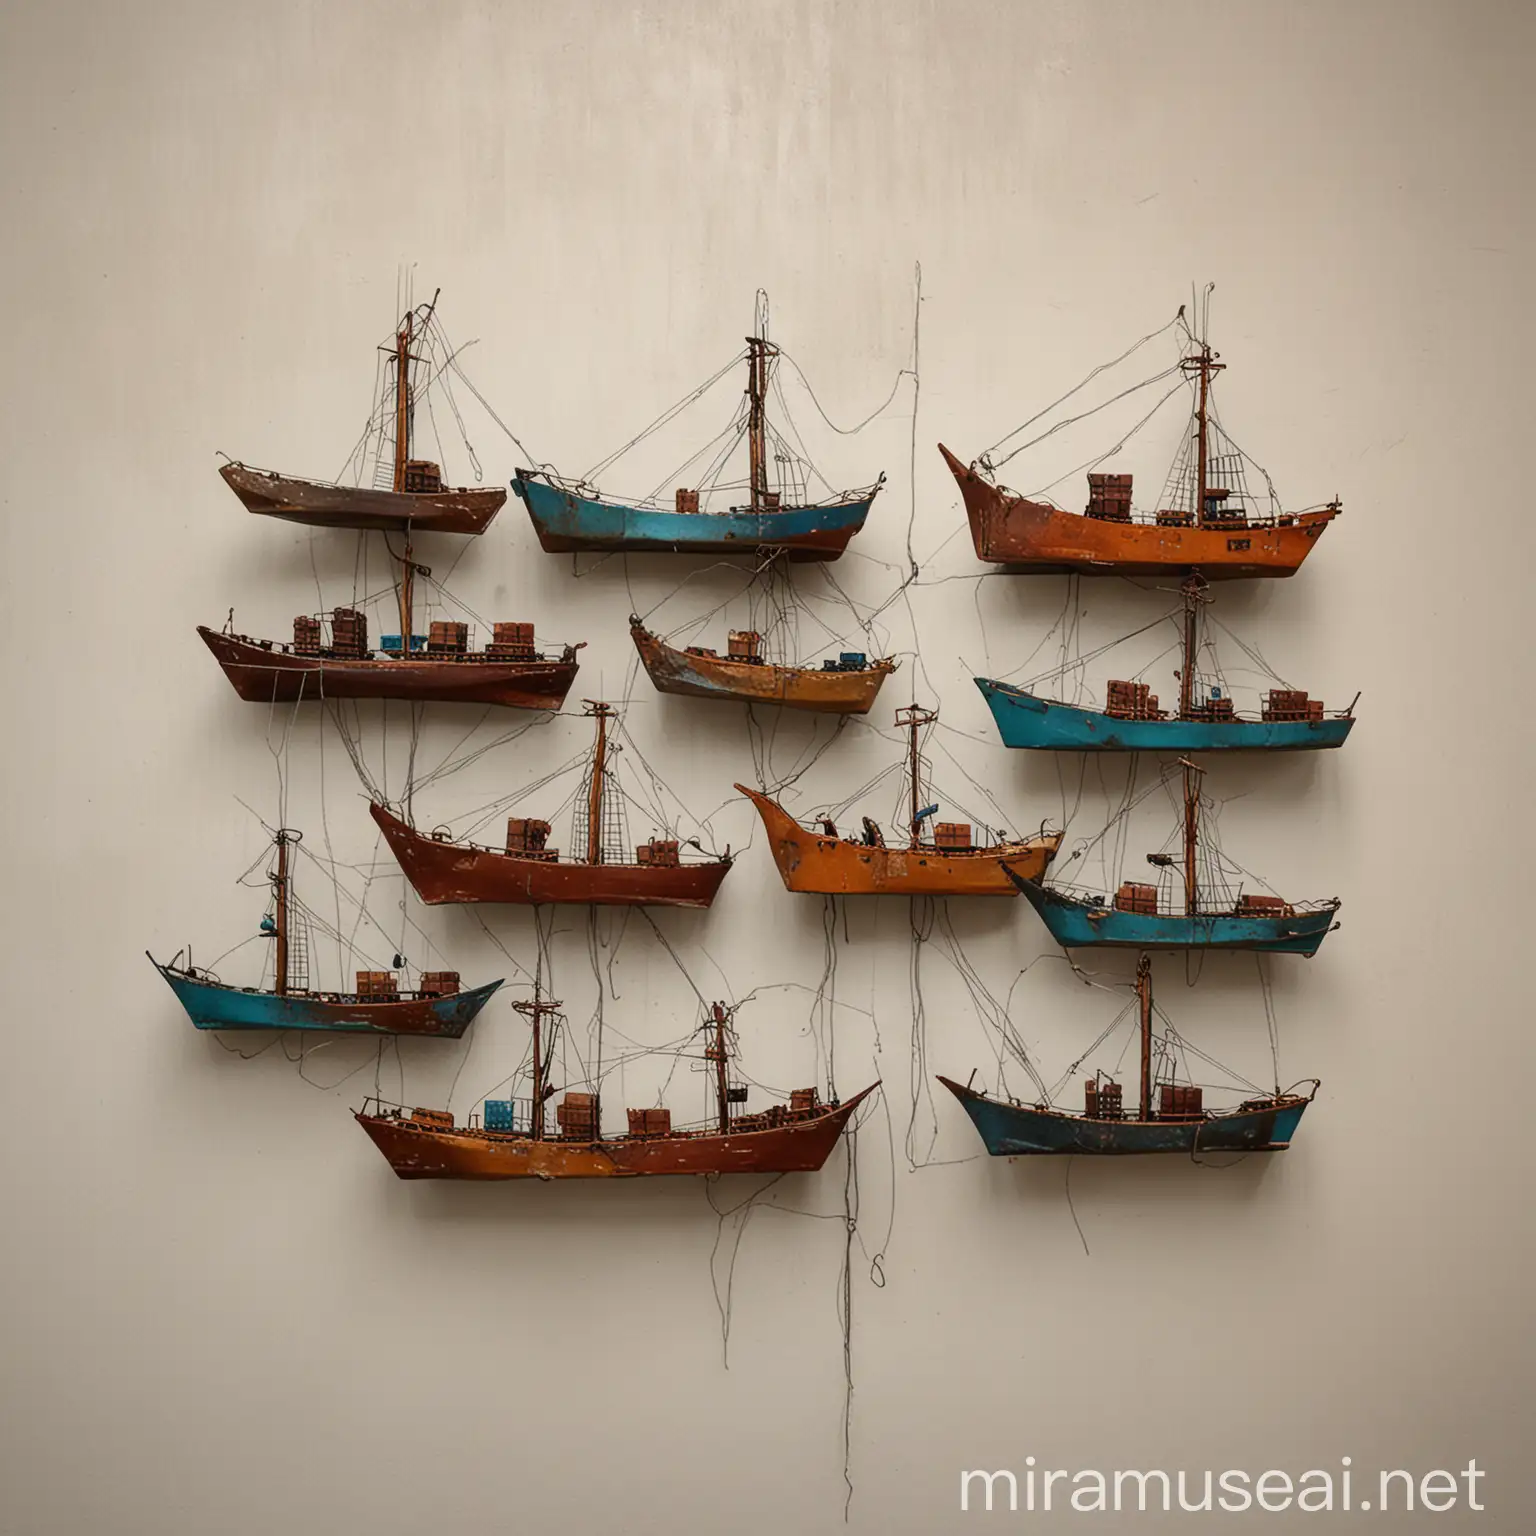 a wall sculpture- of group of gulf ships- abstracted - connected with wires - simple not too reasltic - minimal deisgn - metal rustic material - placed in a office 